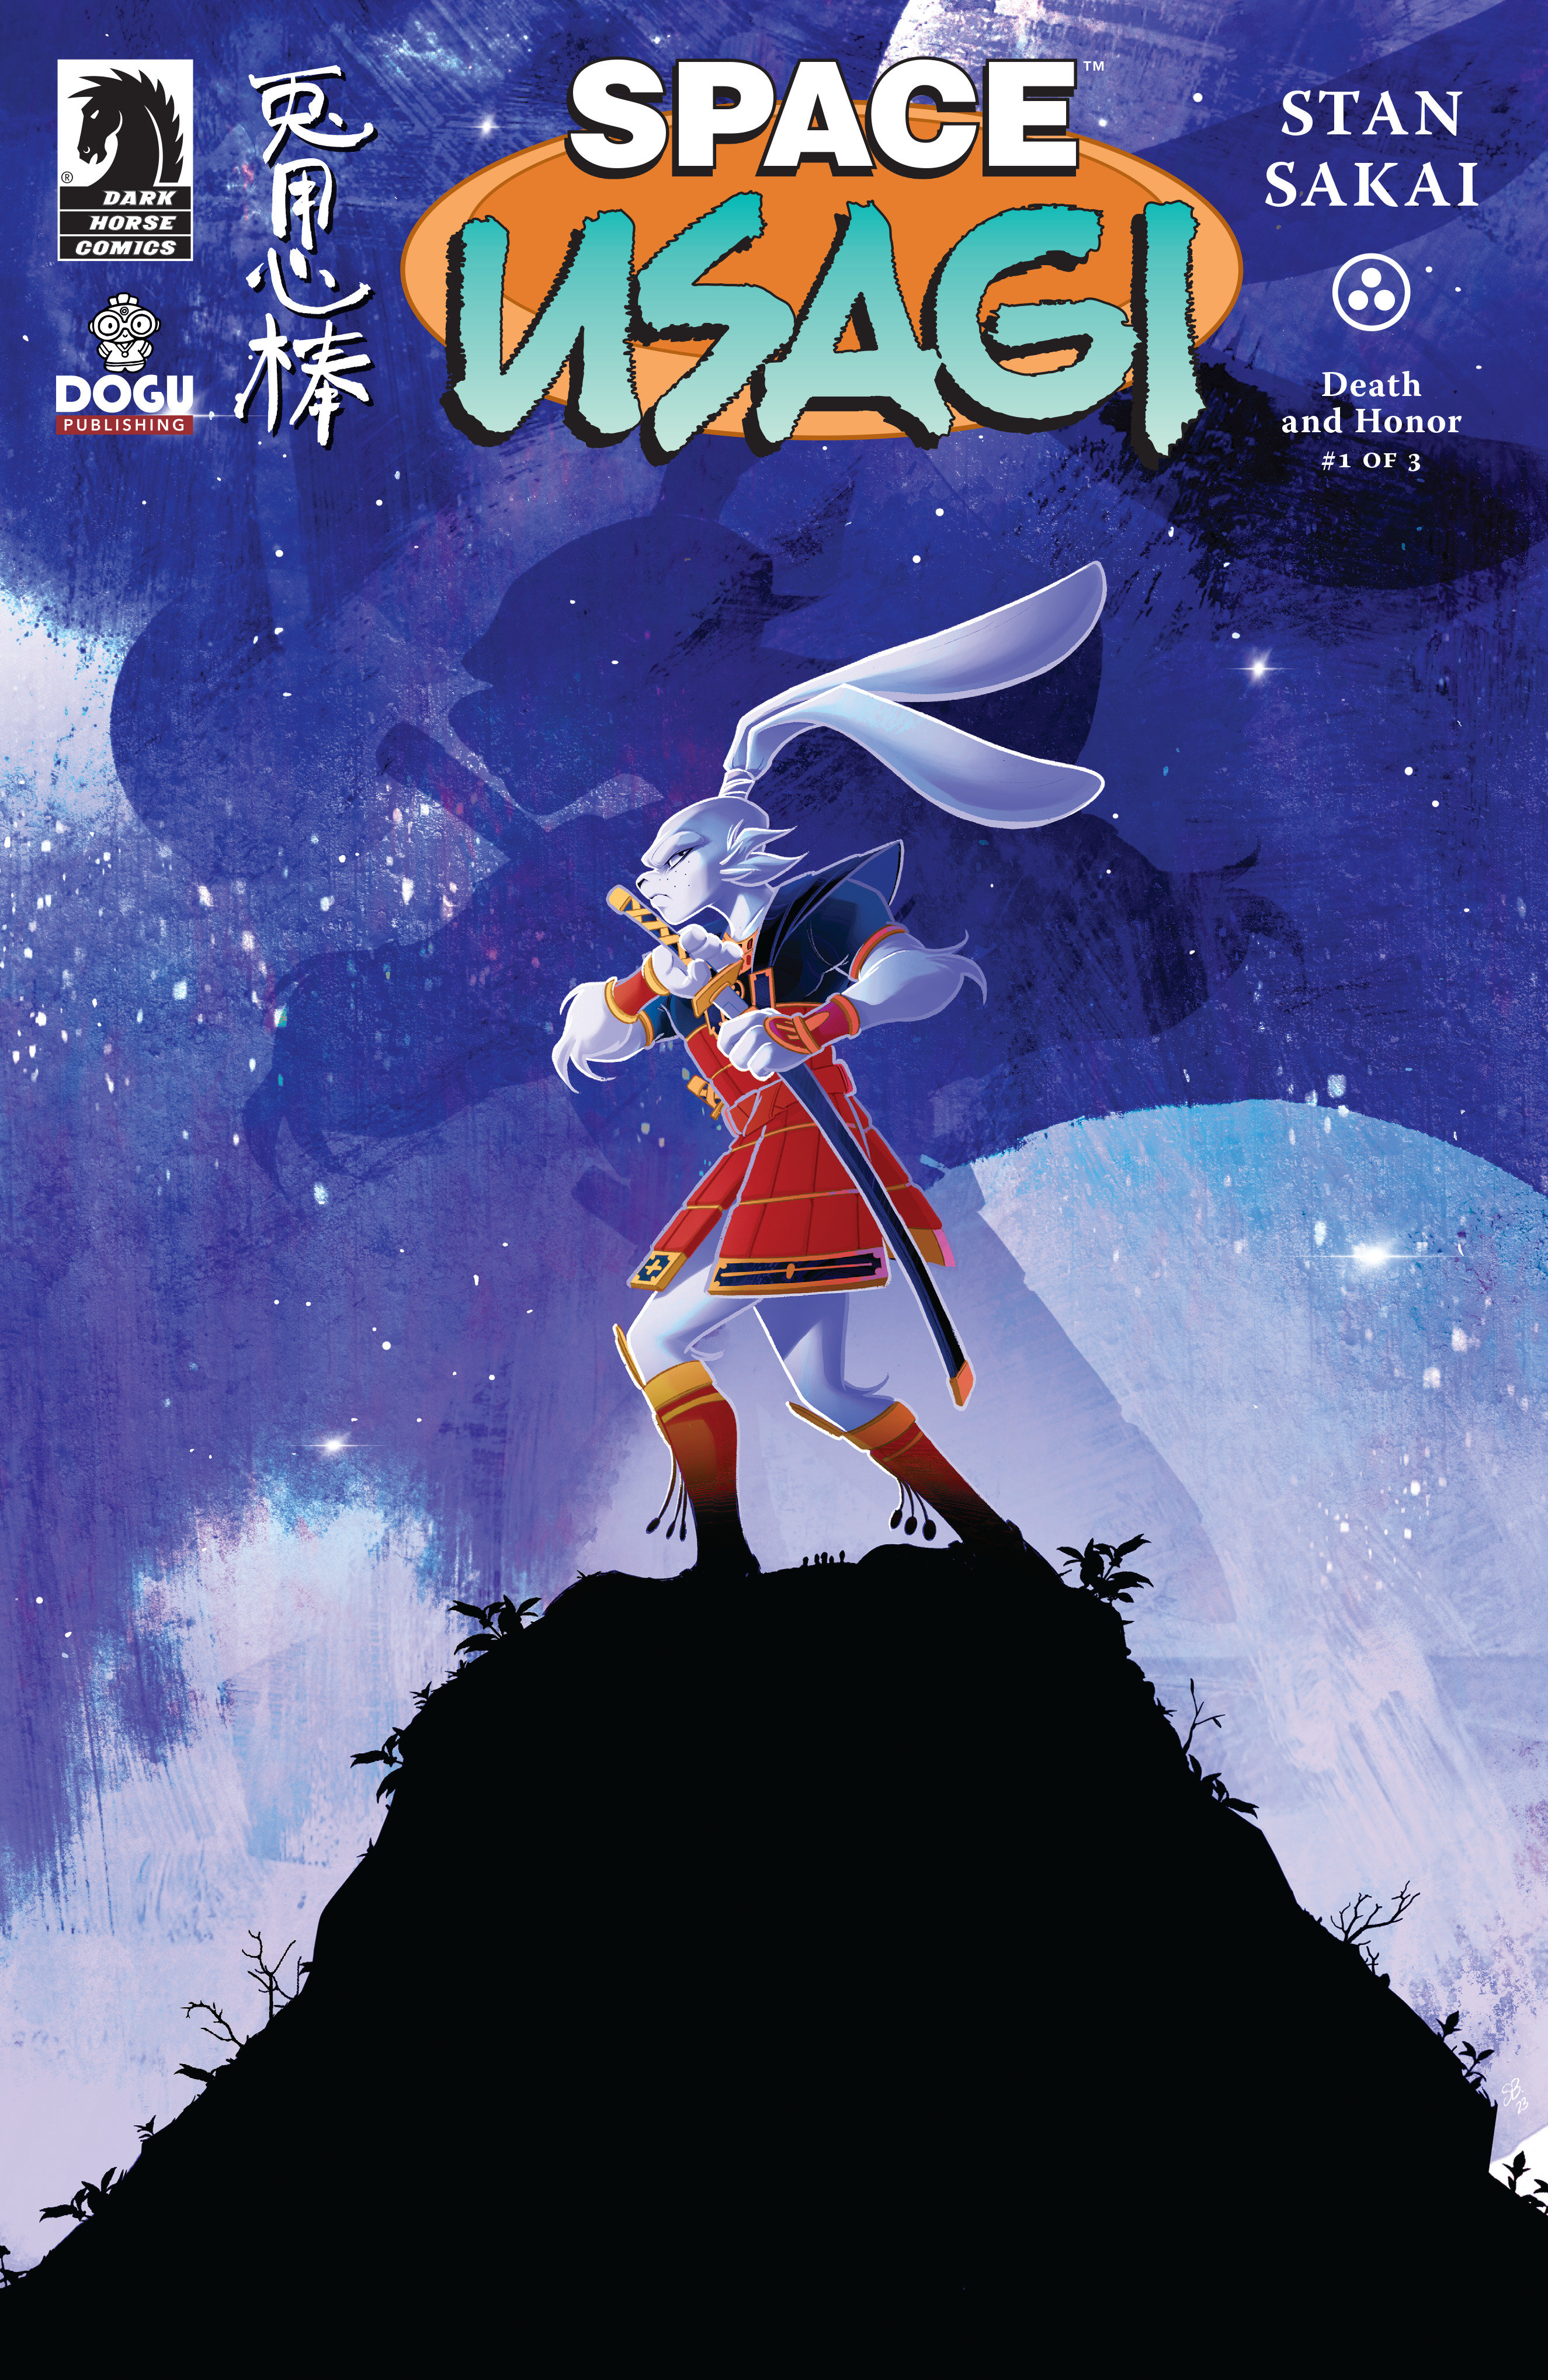 Space Usagi: Death and Honor #1 Cover A (Sweeney Boo)